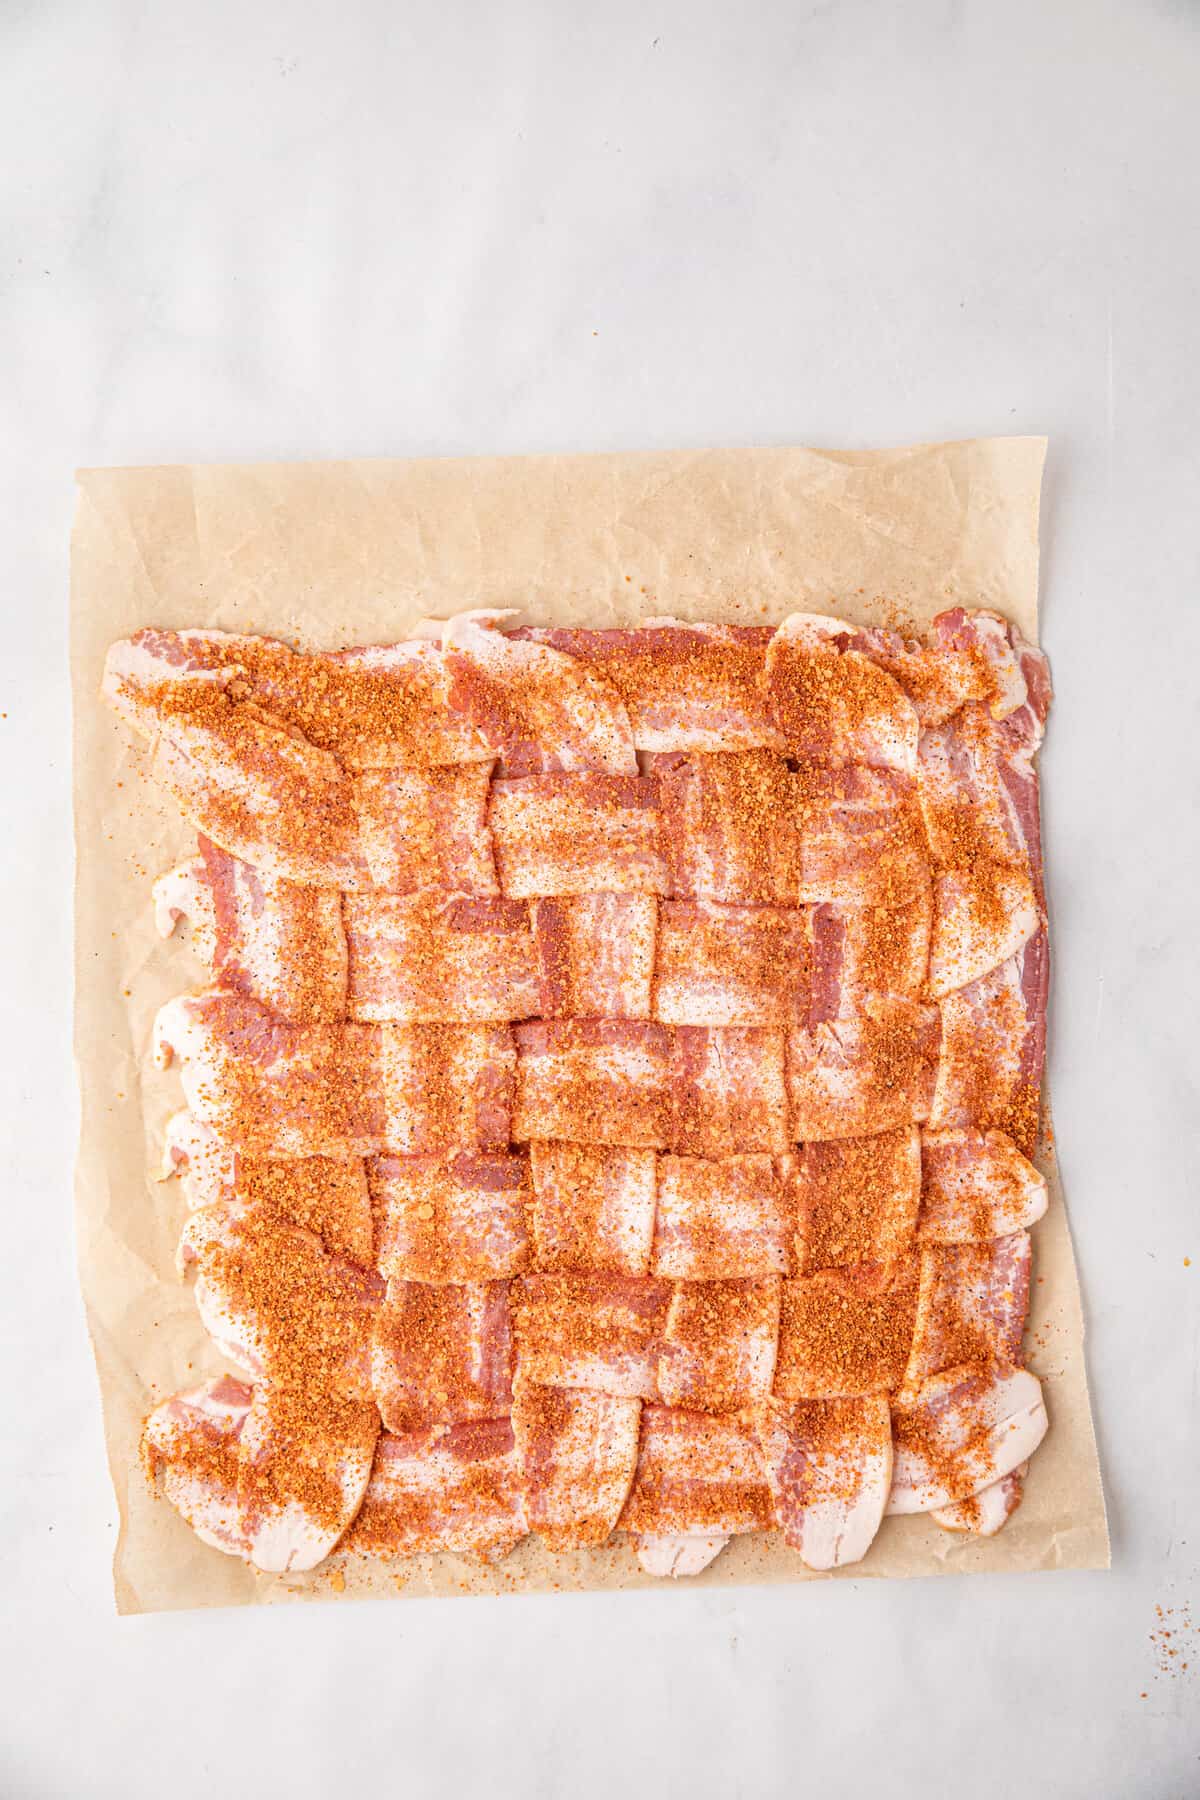 Adding seasoning to bacon weave for Bacon Explosion recipe